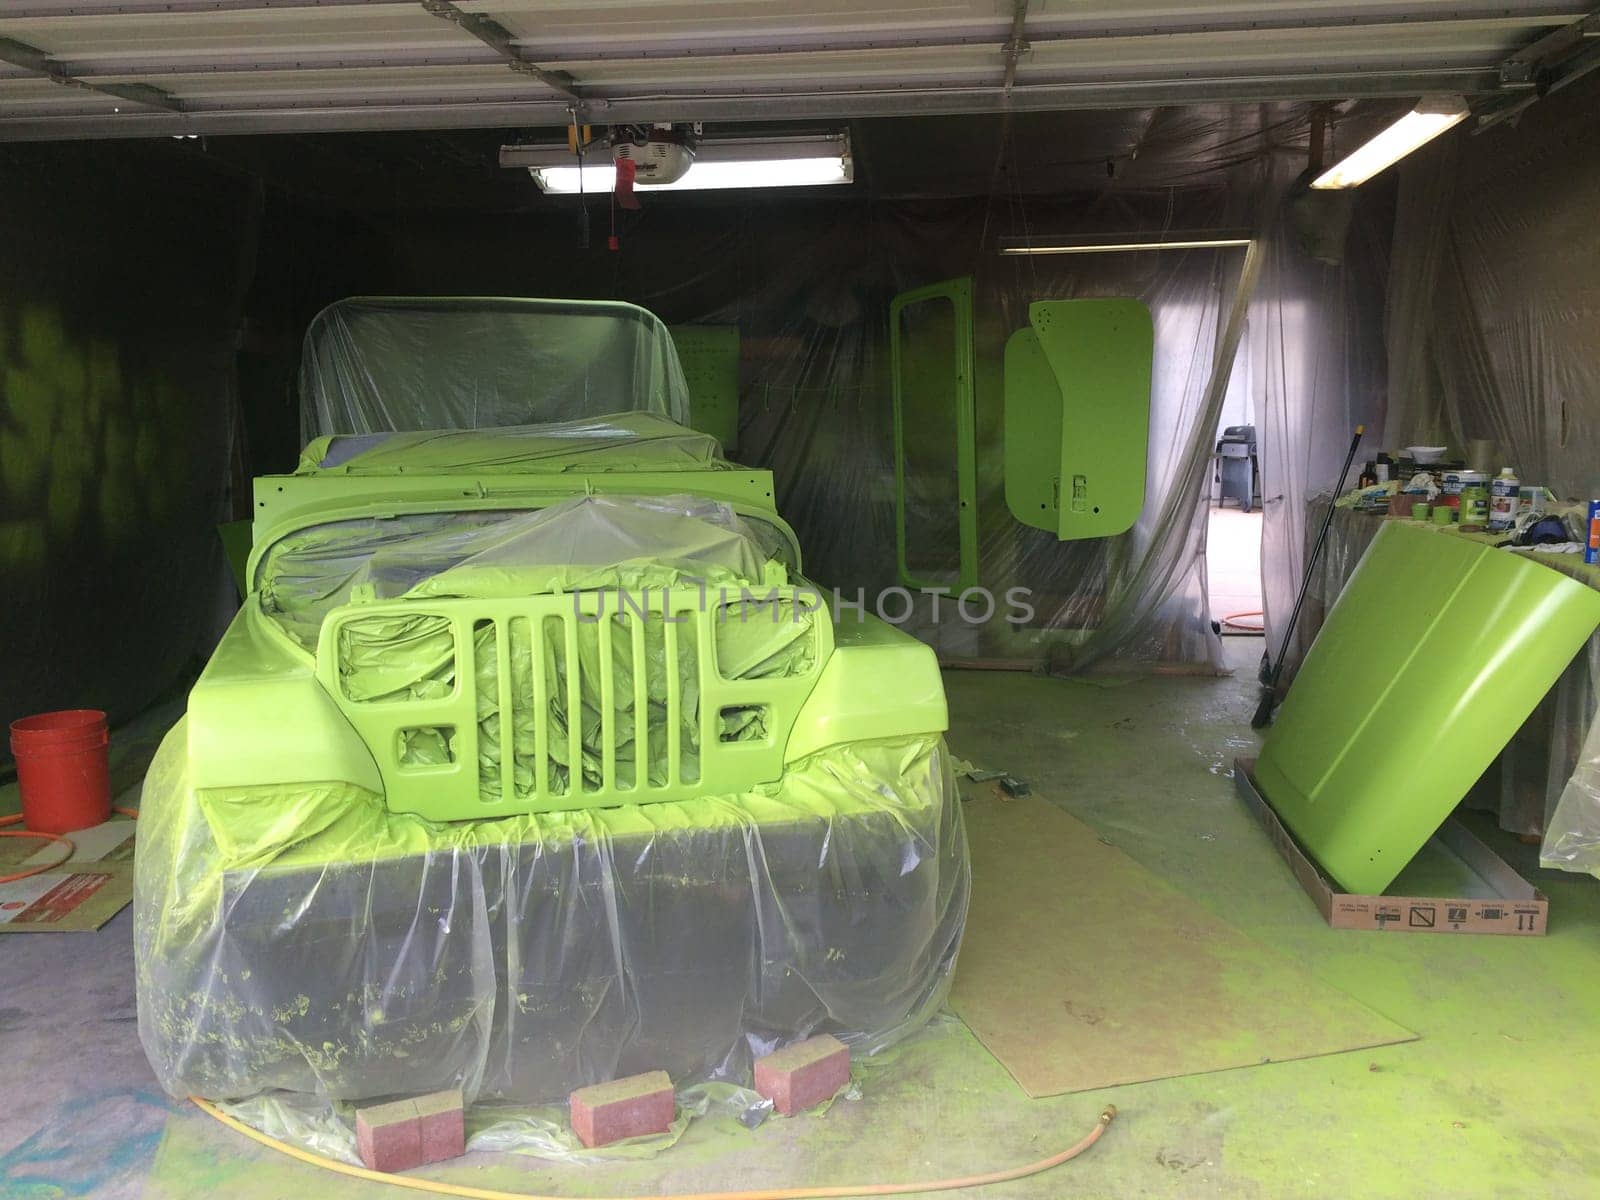 Repainting my 4x4 in the Garage, Lime Green Paint Job, 1990s Vehicle by grumblytumbleweed